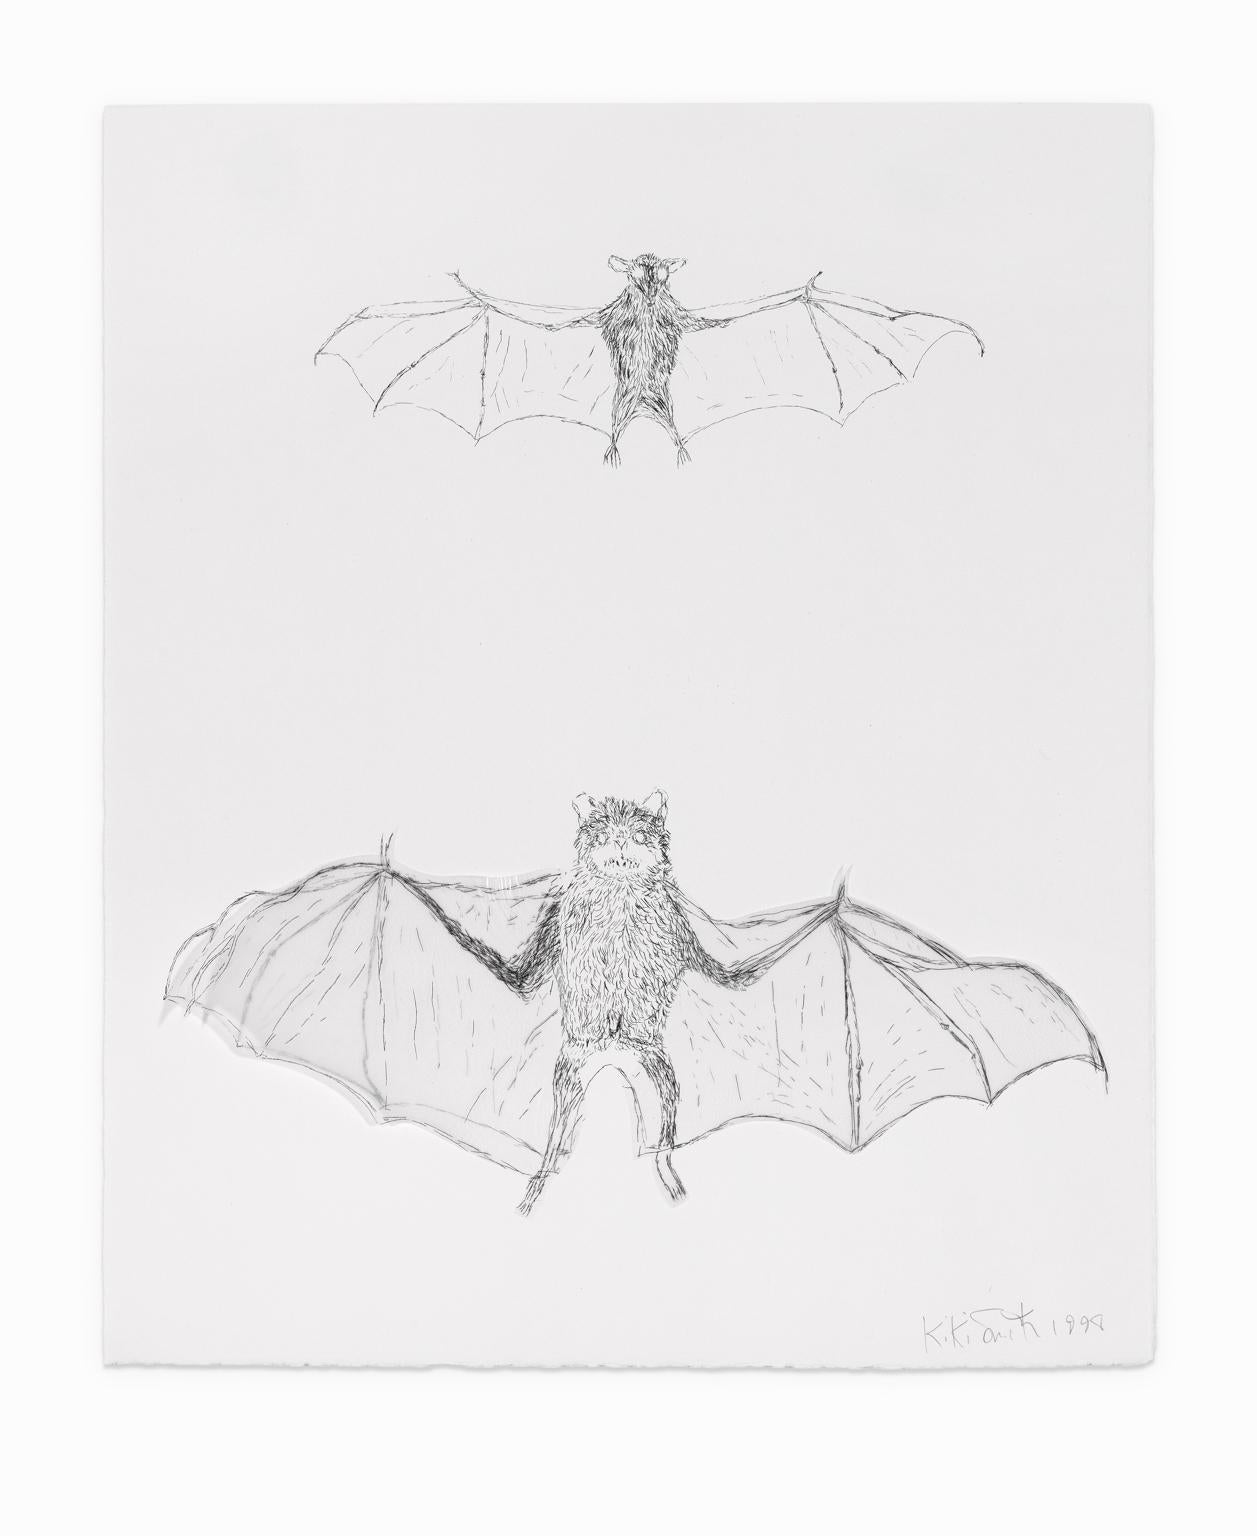 A collage lithograph from her series Various Flying Creatures by Kiki Smith titled: "bat." Smith has used one of her animal/insect iconic figures for this glassine paper and wove paper lithograph collage creating the bat close to life size and